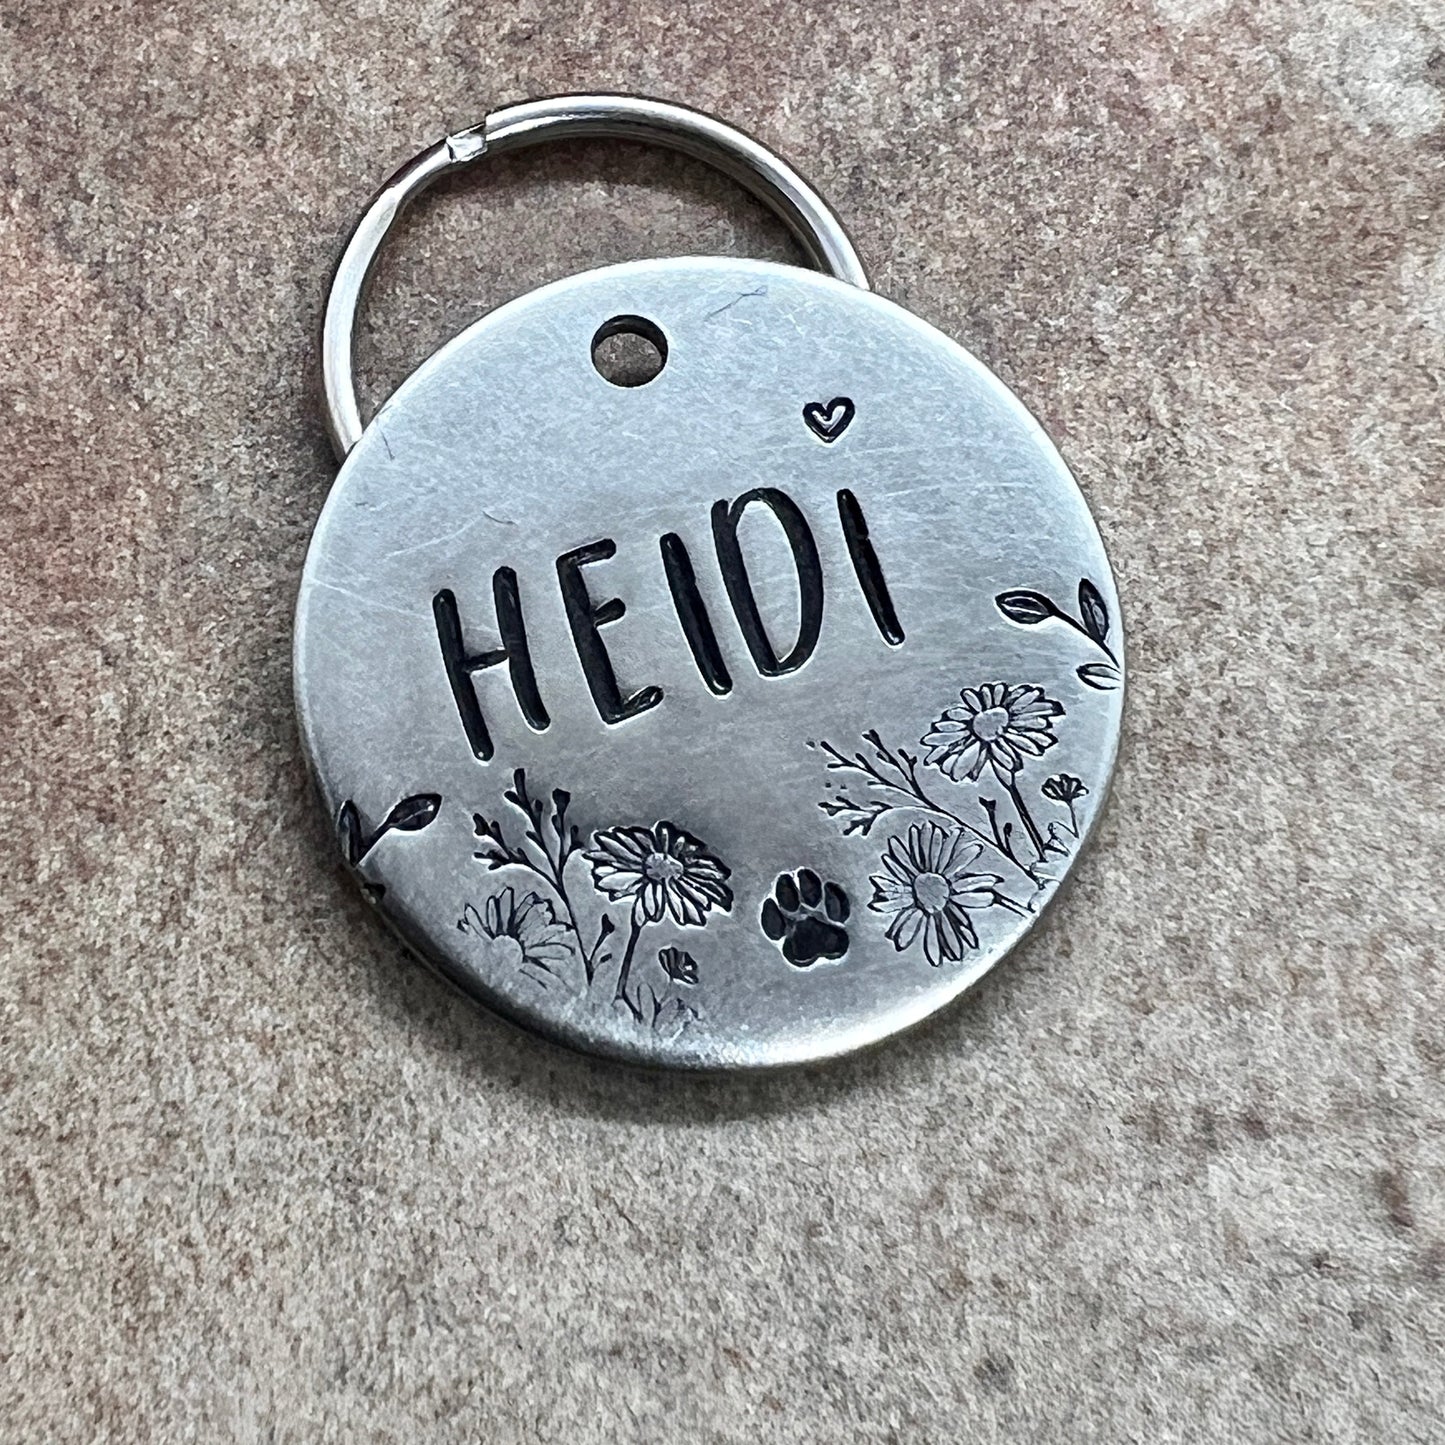 ELEMENTS design your own pet tag • Round 28mm